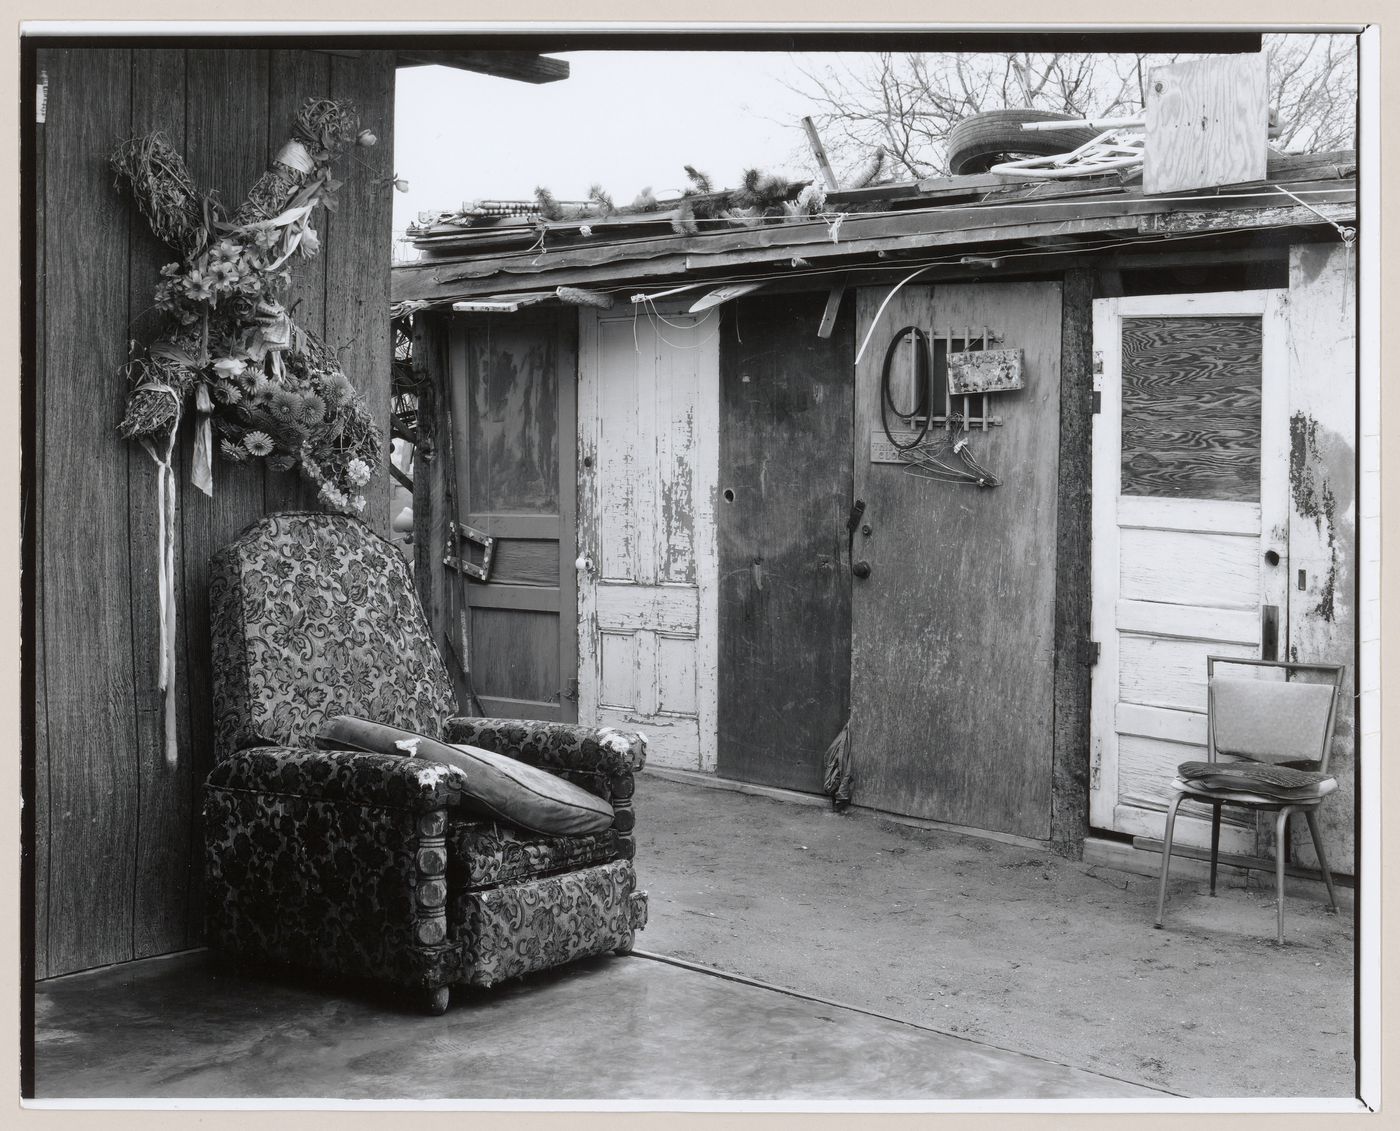 View of cross decorated with flowers hung above upholstered chair in outdoor space, Old Pascua, Tucson, Arizona, United States (from a series documenting the Yaqui community of Old Pascua)